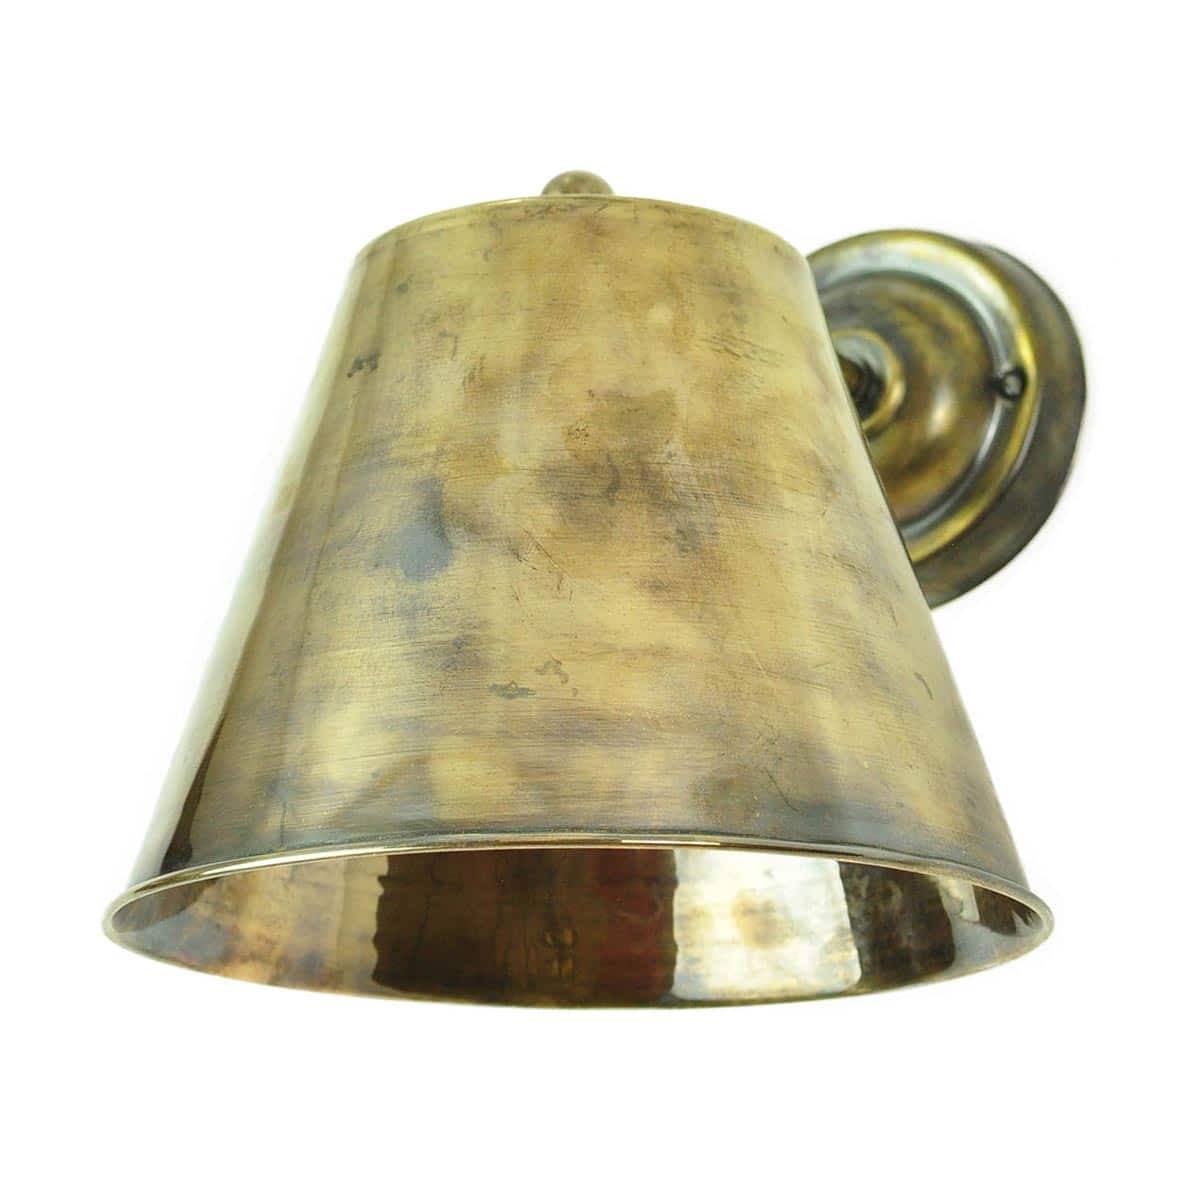 Map Room Nautical 1 Lamp Large Wall Light Solid Antique Brass